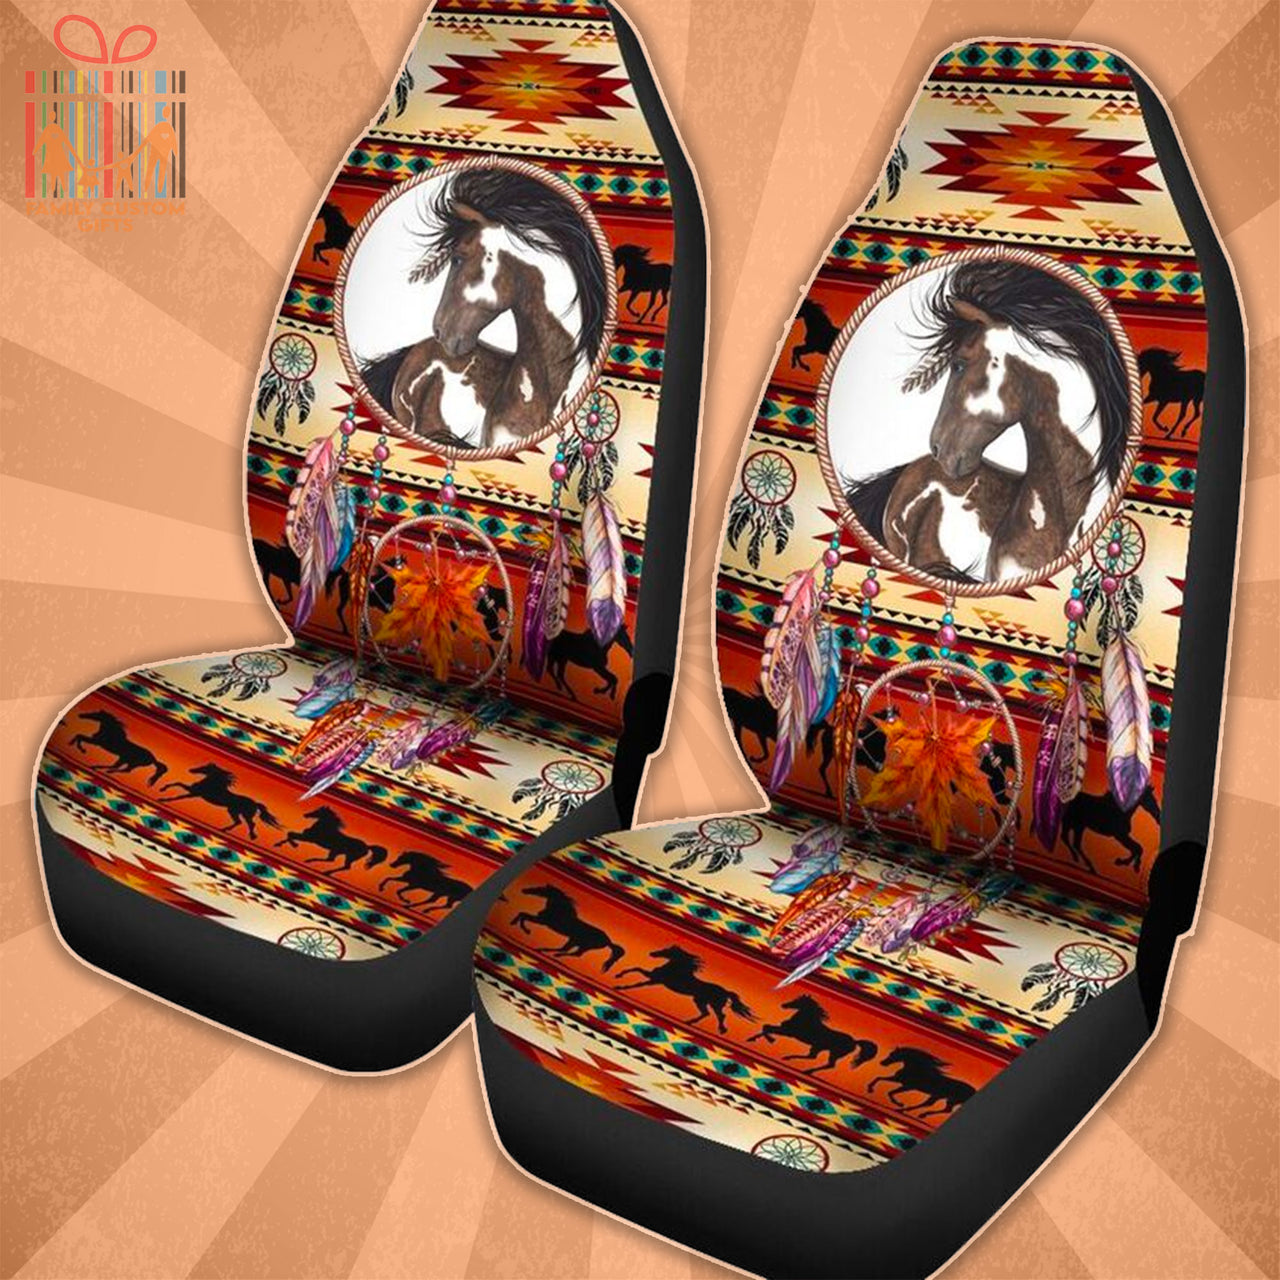 Custom Car Seat Cover Galloping Horses Seat Cover for Cars Boho Dream Catcher Wildlife